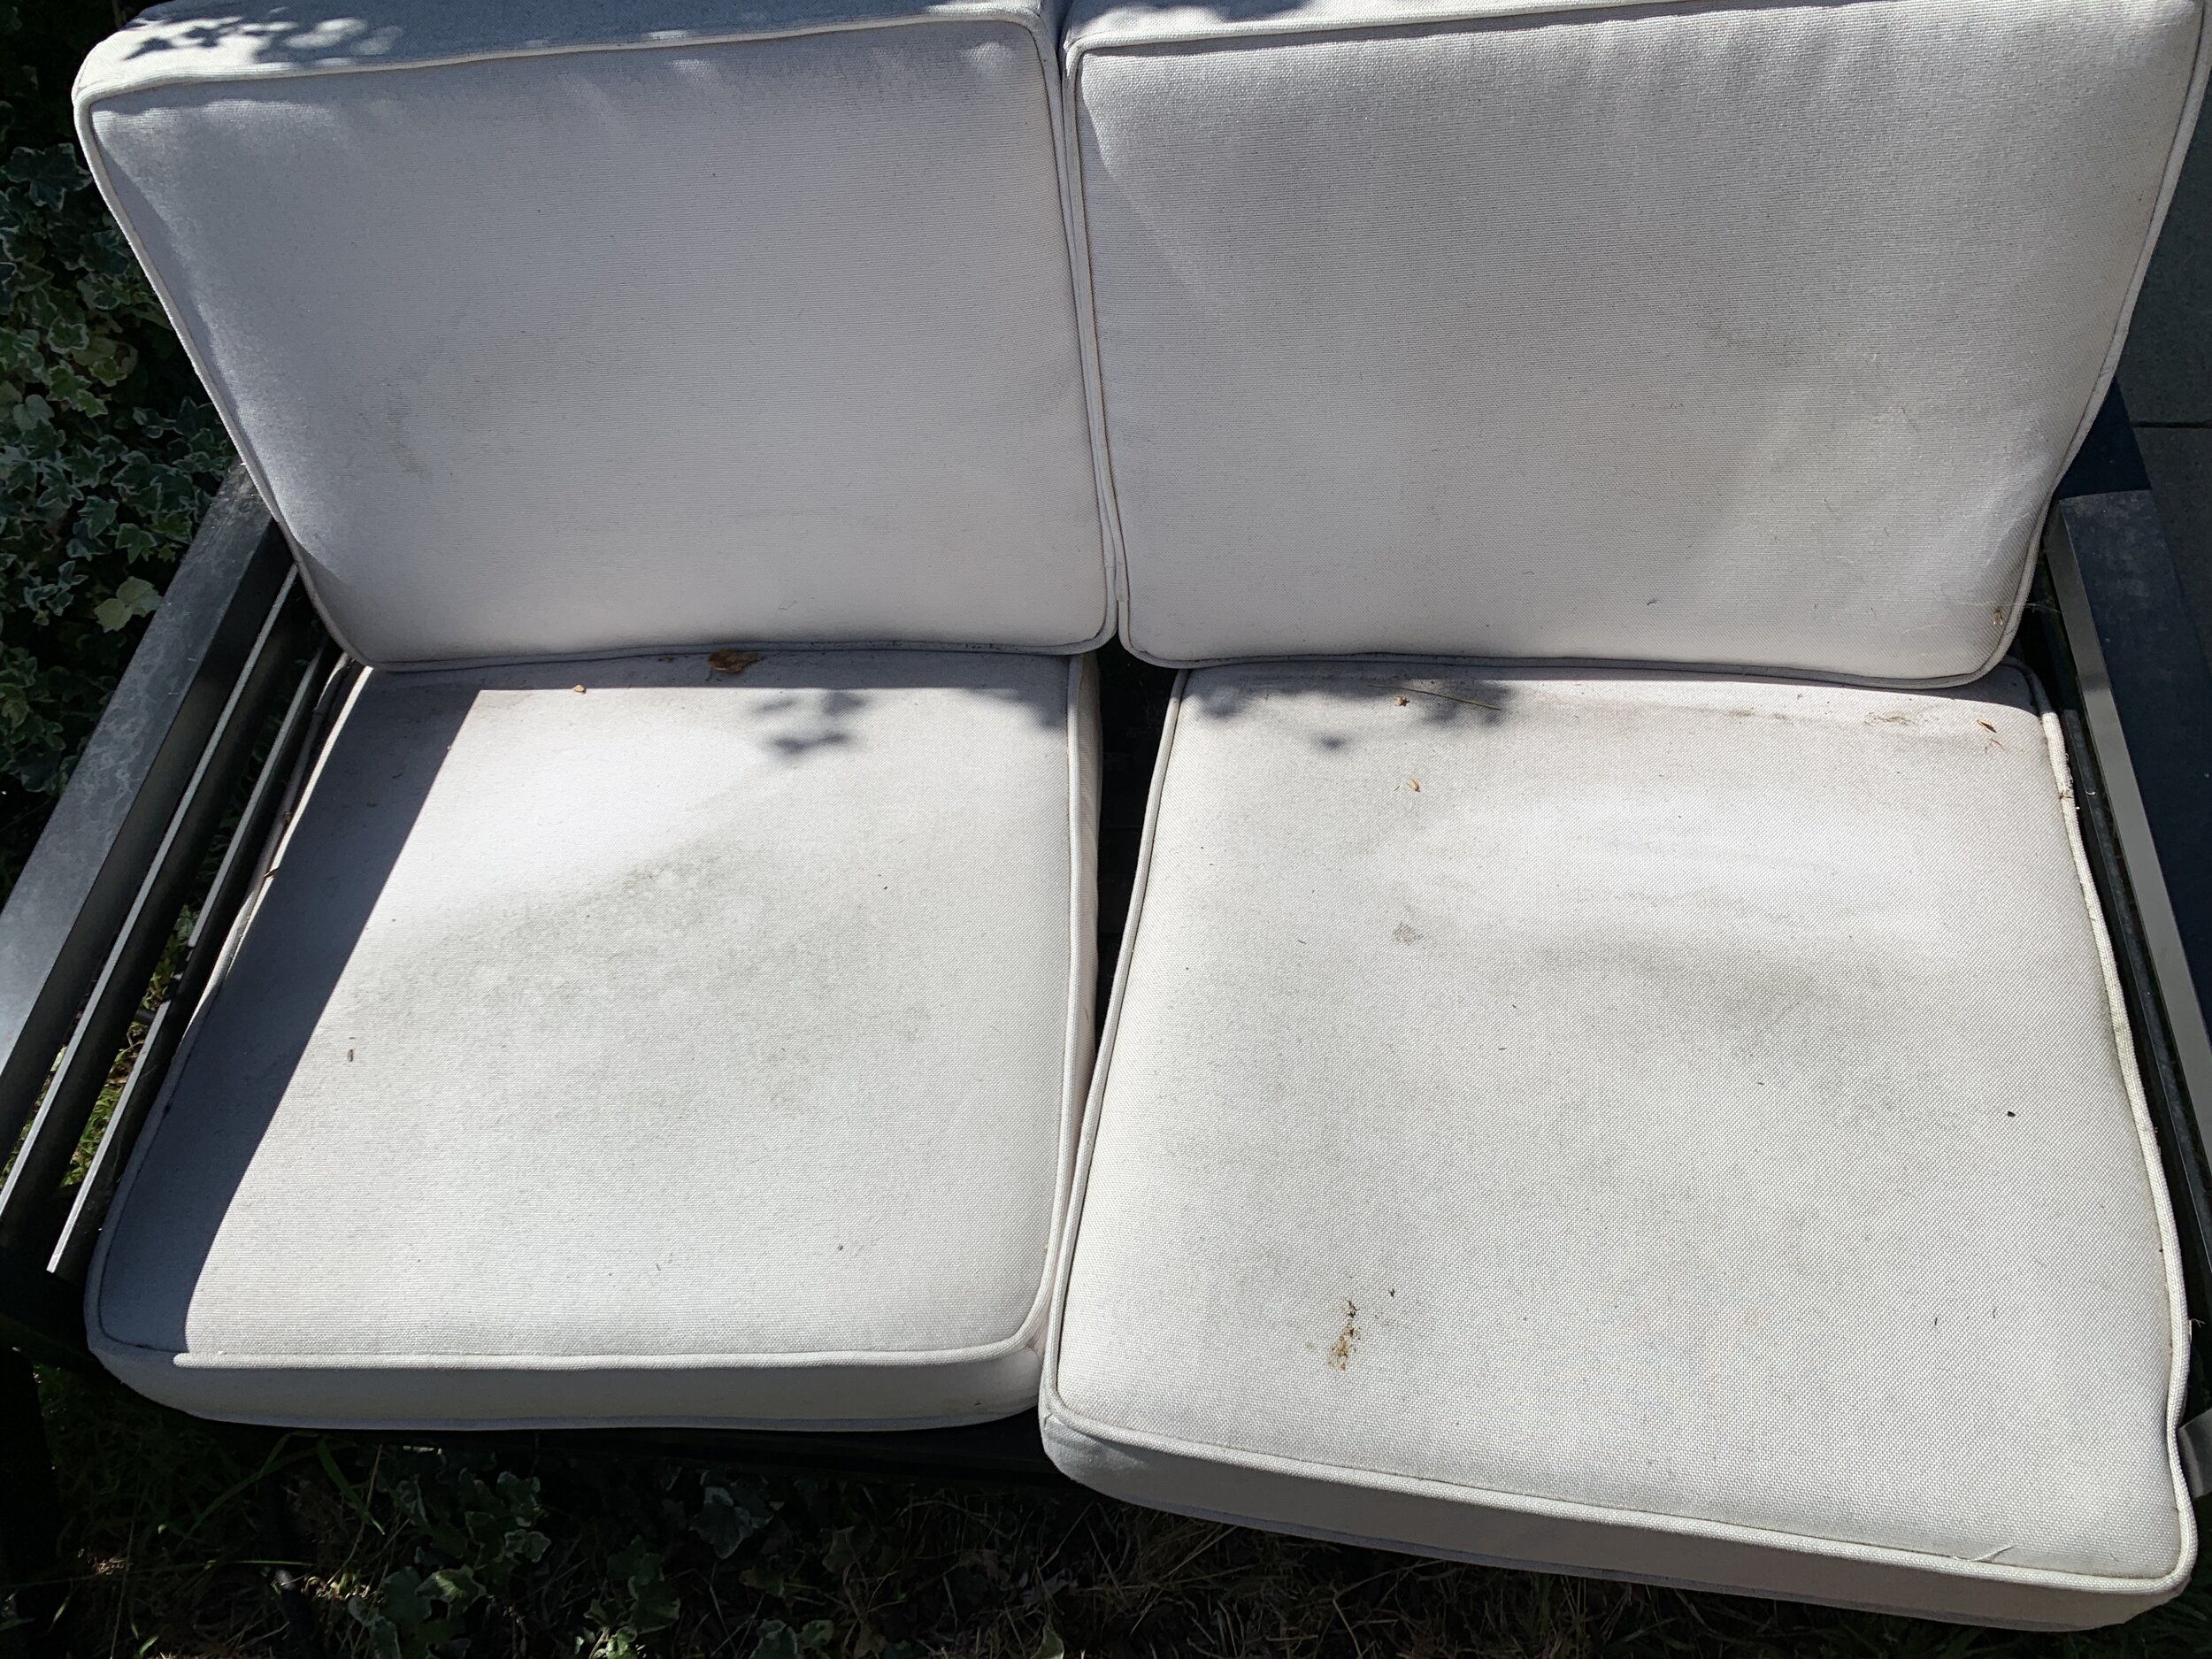 Pressure Washing My Outdoor Cushions For The First Time in Two